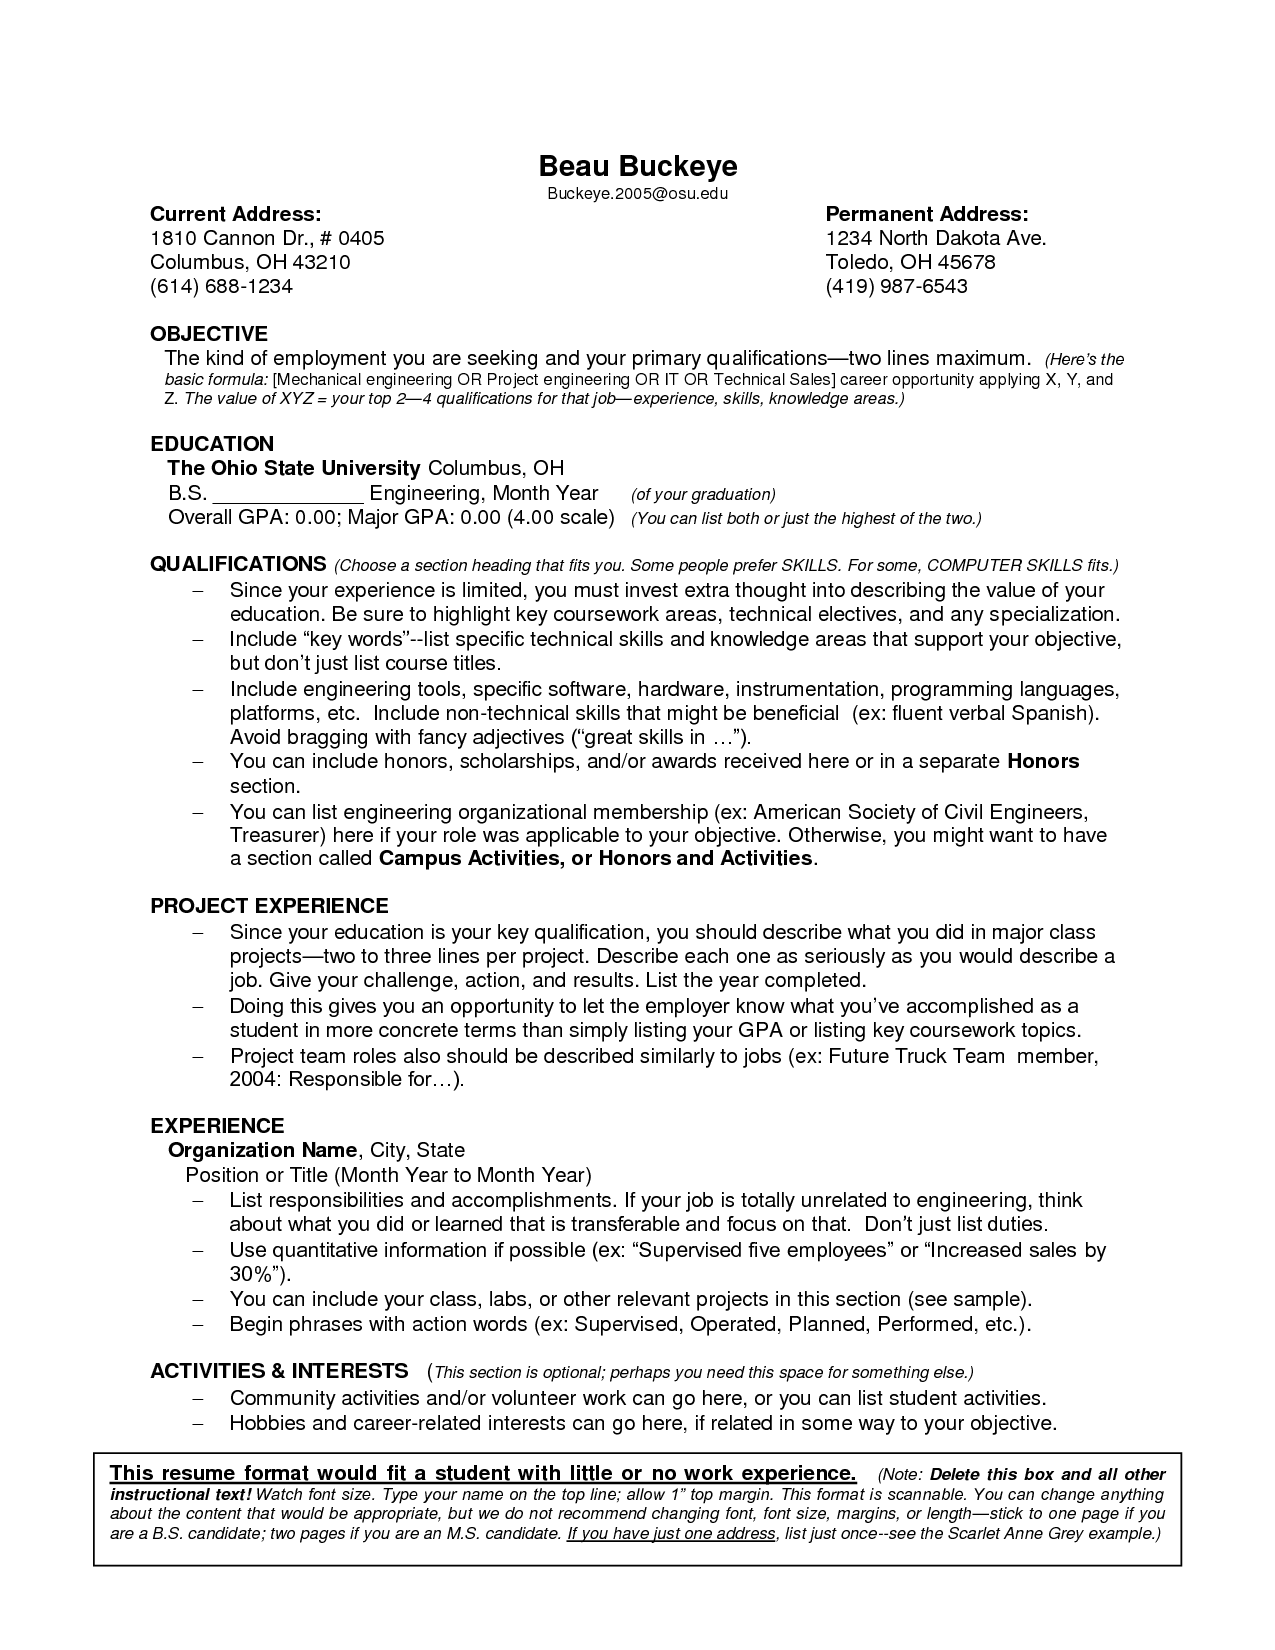 Resume Templates Limited Work Experience 